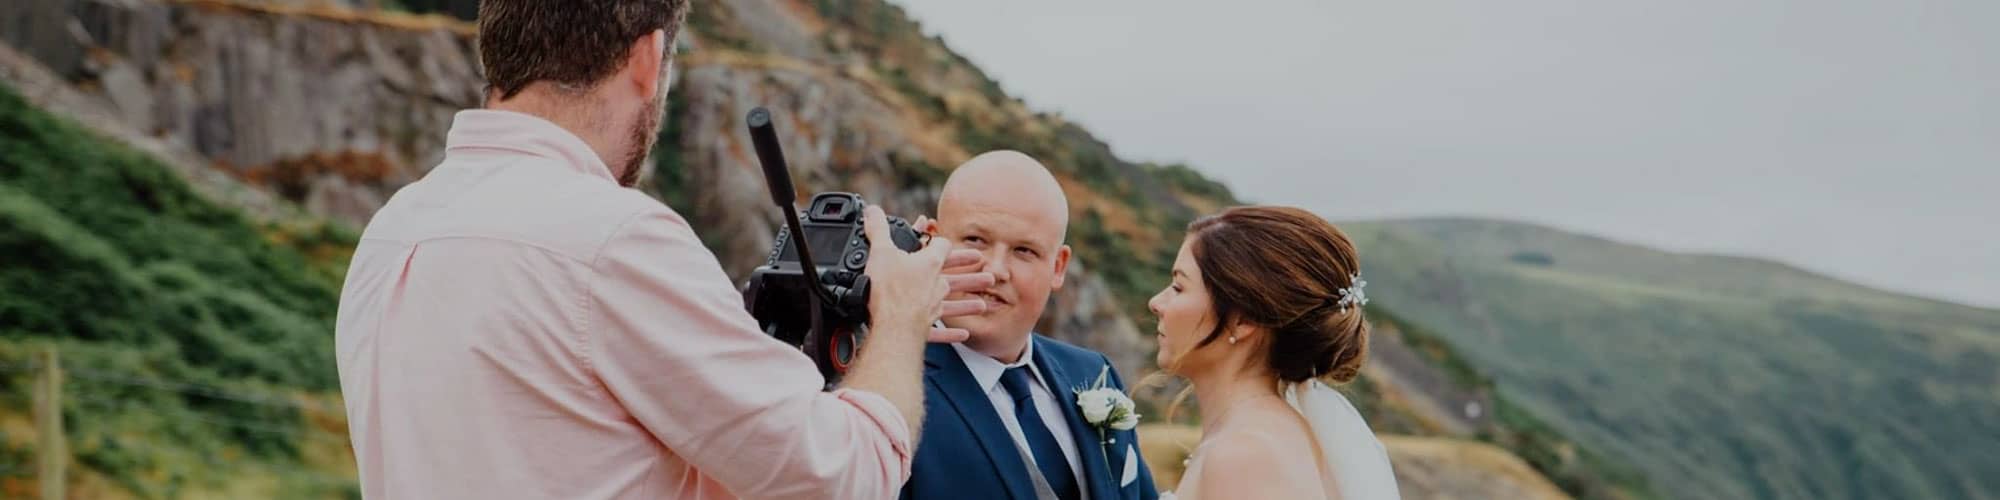 Wedding video being filmed at North Wales venue